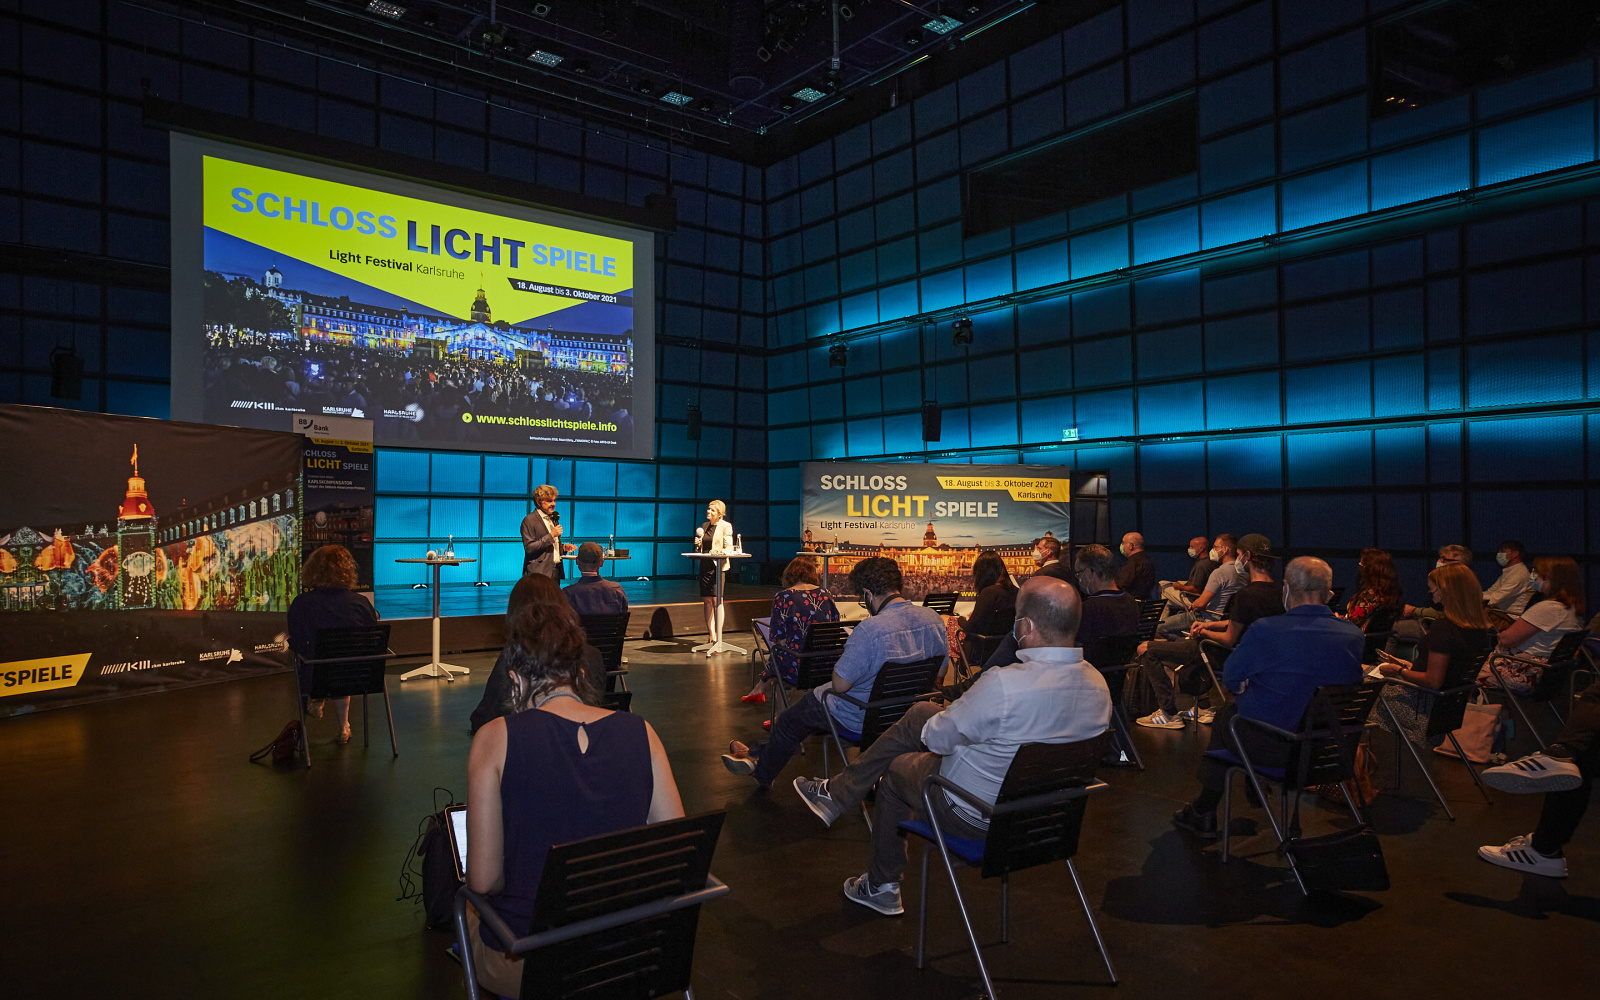 The press conference of the Schlosslichtspiele 2021 in the media theater of the ZKM. Dominika Szope speaks to Lord Mayor Dr. Frank Mentrup, people sit in the audience.